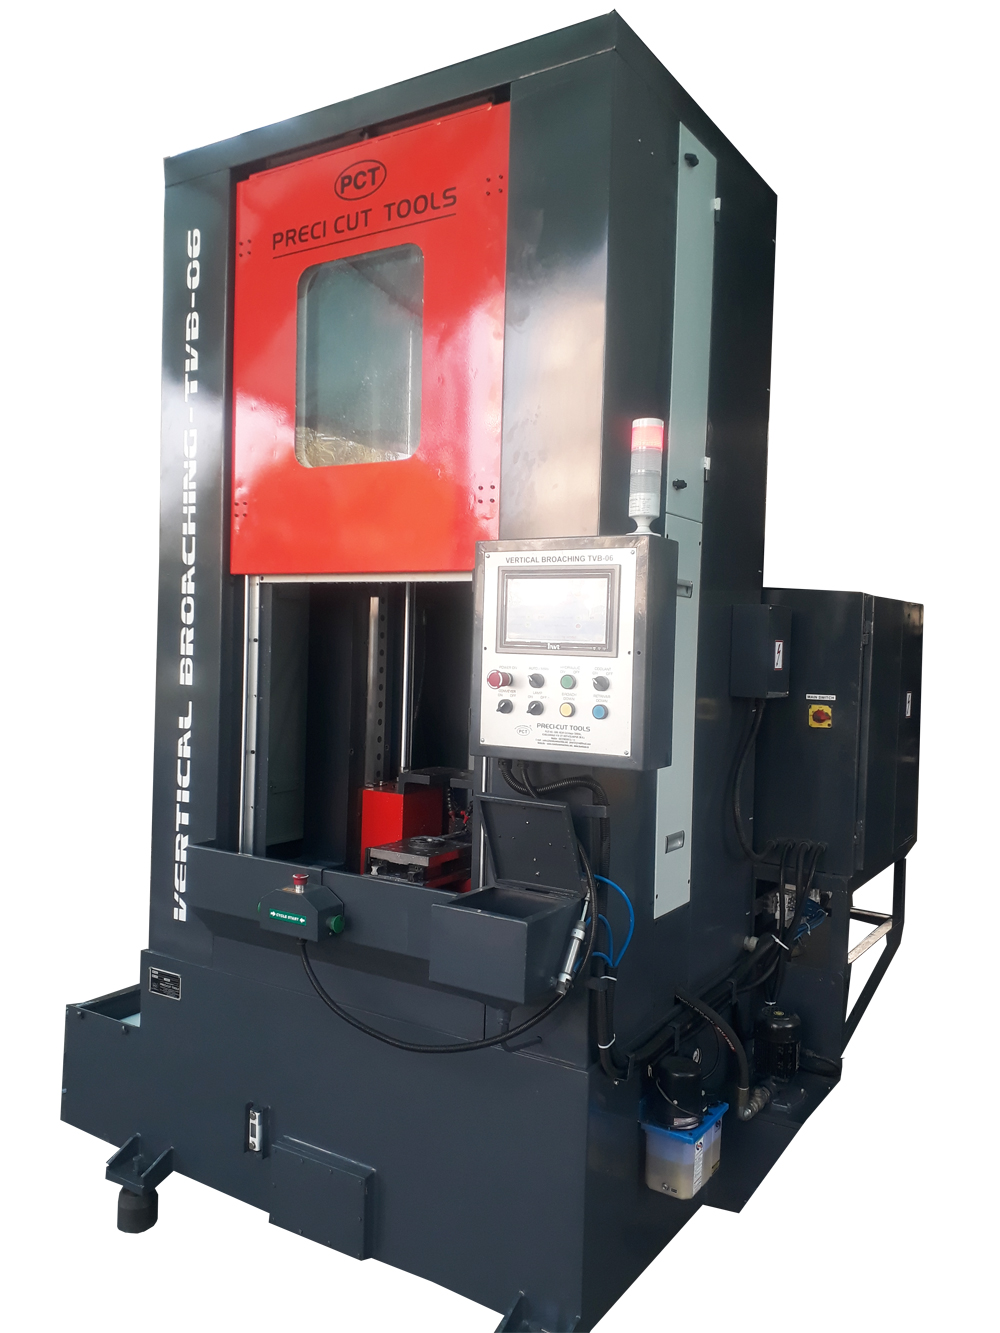 Table-up Vertical Broaching Machine (Hydraulic)